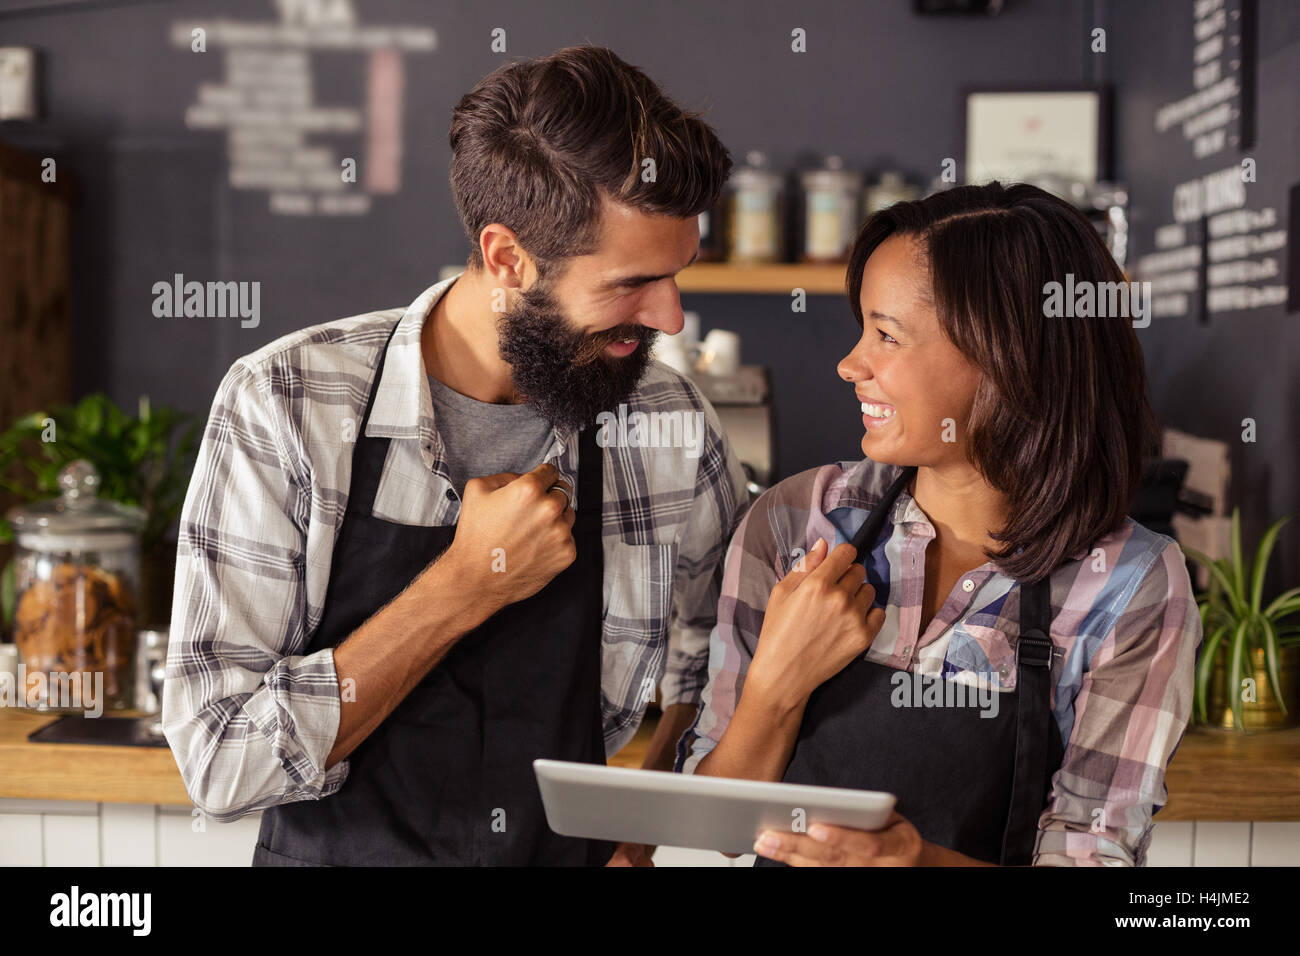 Smiling waiter and waitress interacting while using digital tablet Stock Photo